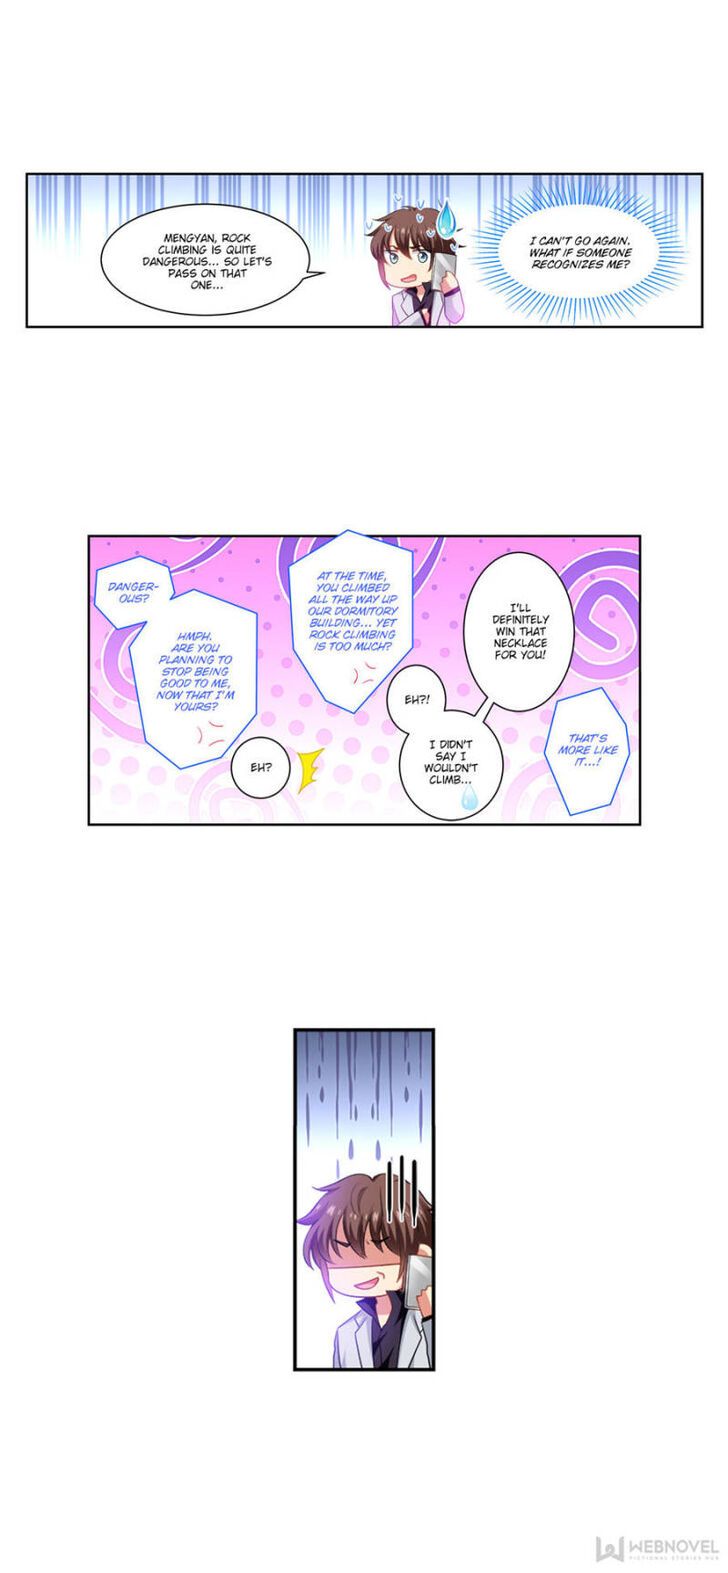 So Pure, So Flirtatious ( Very Pure ) Chapter 268 page 5